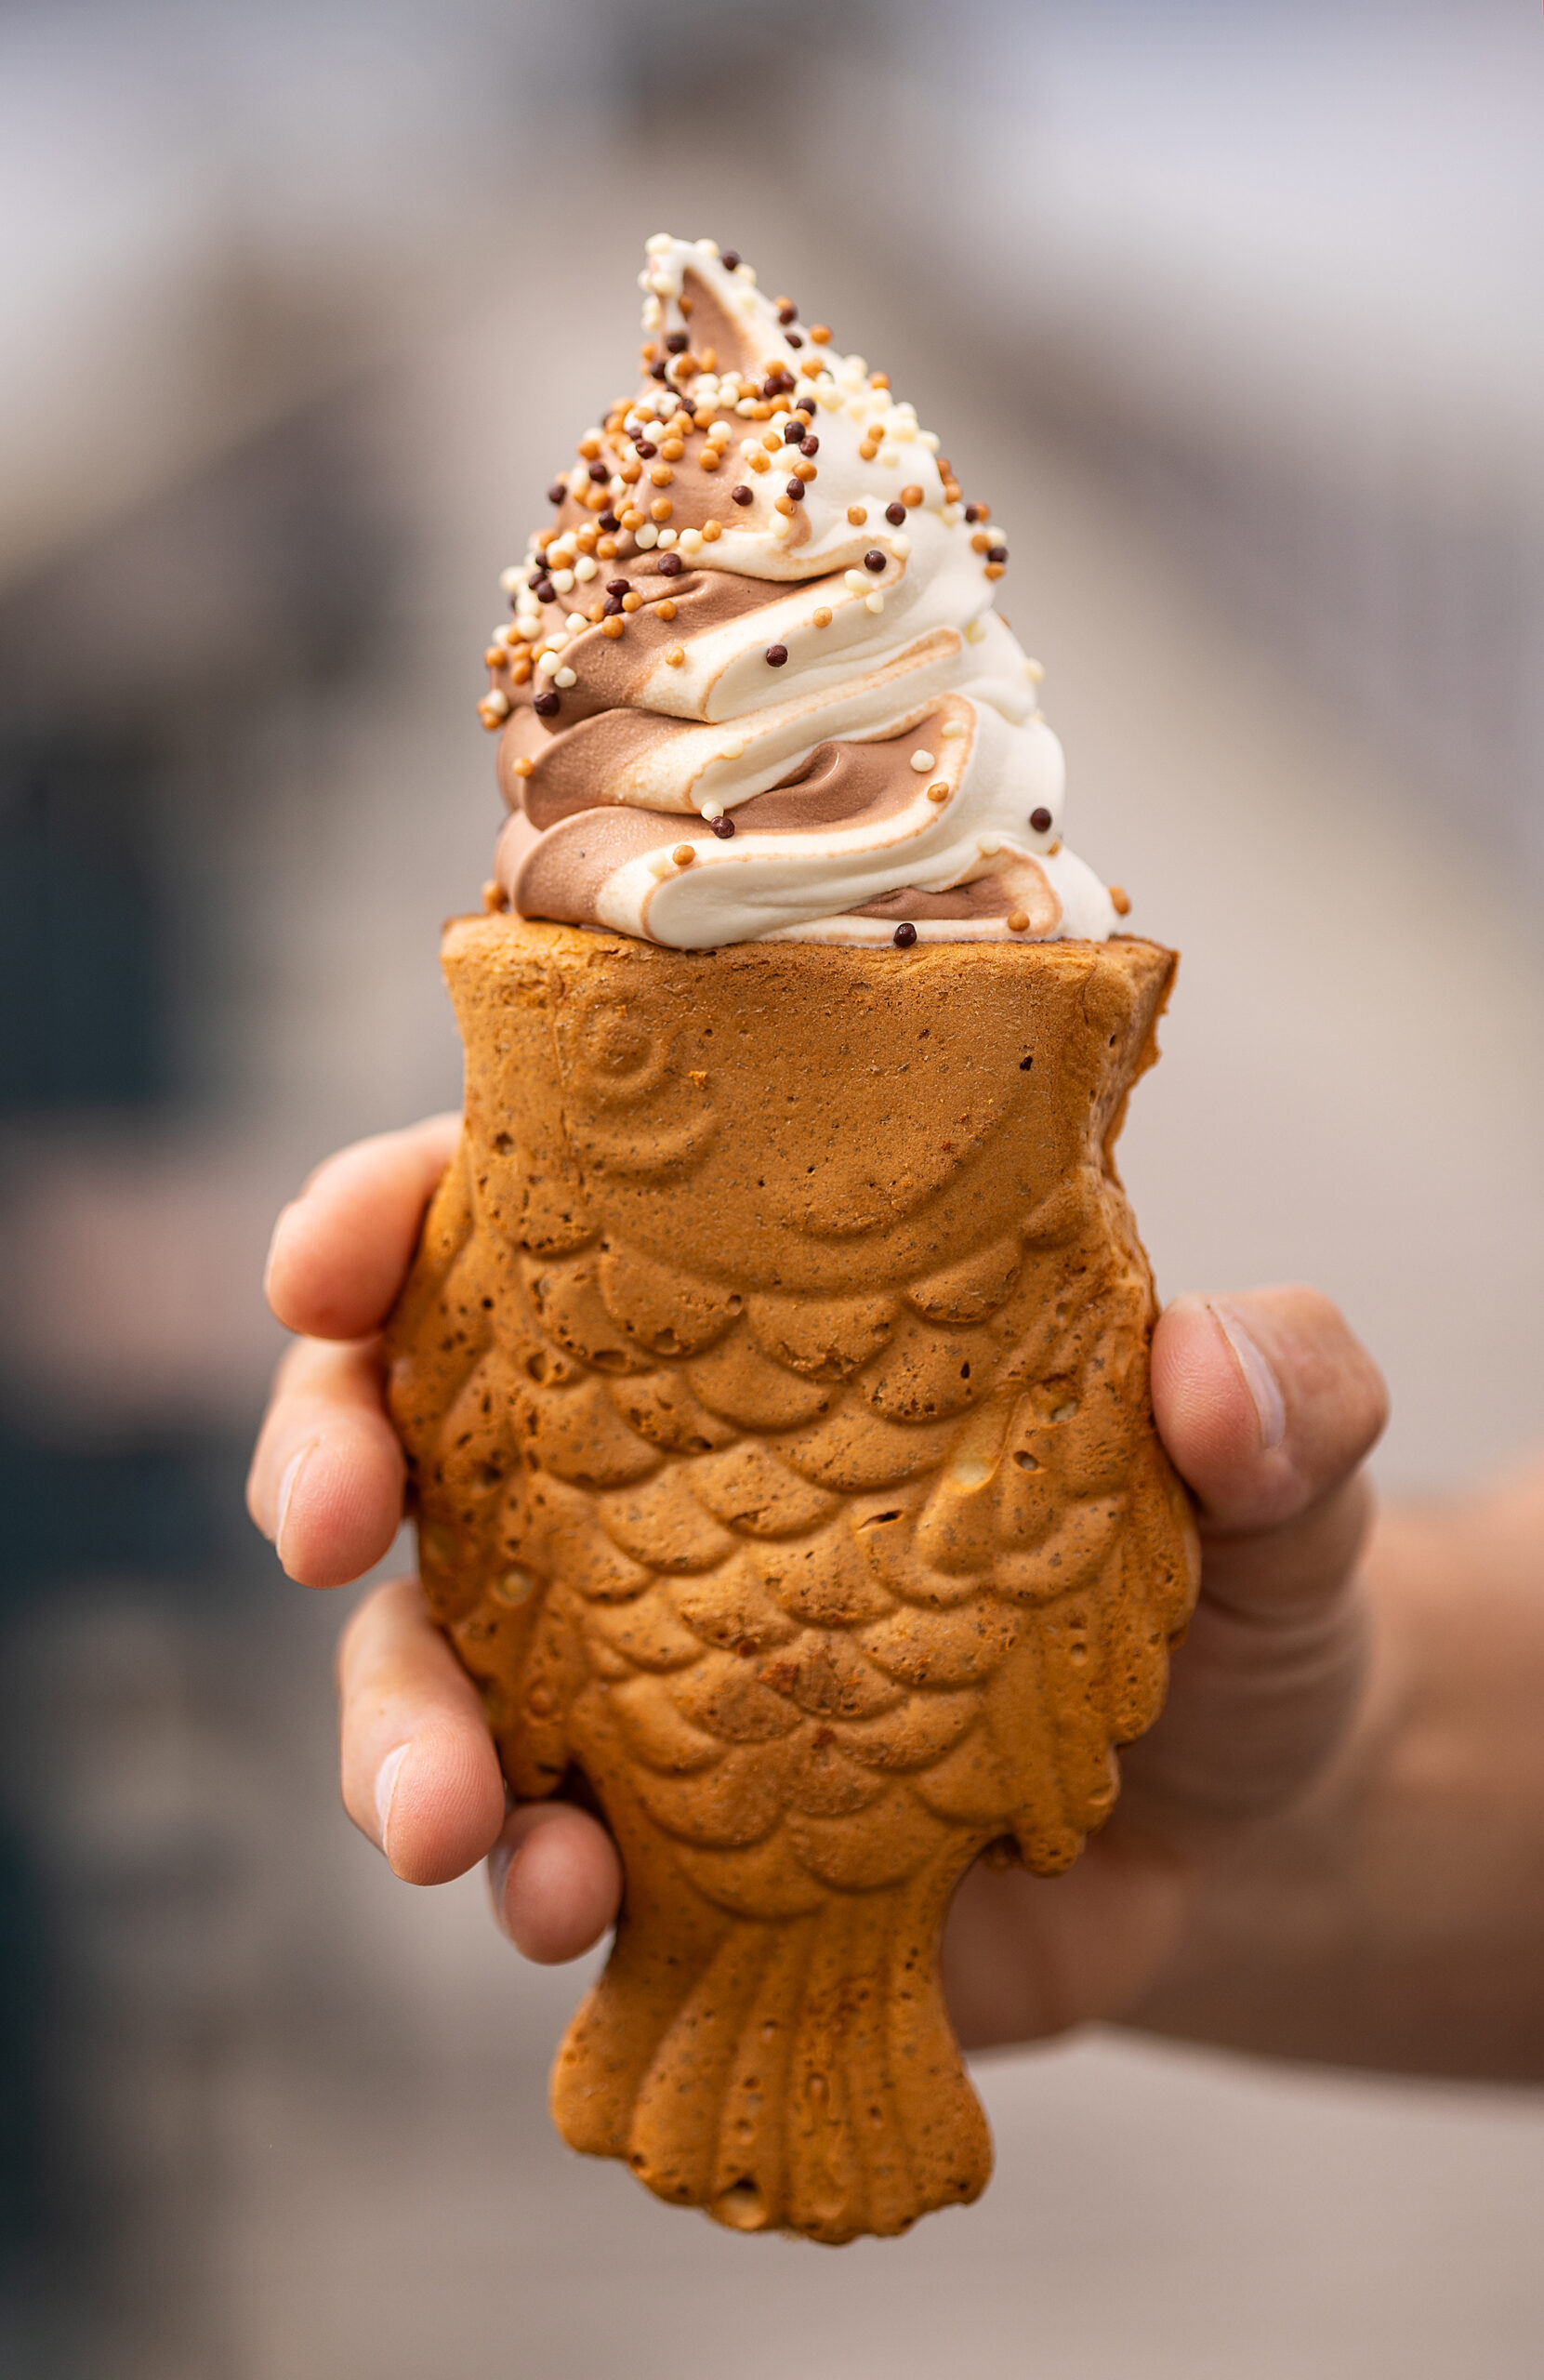 Soft Serve Straus Family Creamery in a Taiyaki Fish Cone from Nick’s Cove Restaurant on Tomales Bay Monday, September 18, 2023. (Photo John Burgess/The Press Democrat)